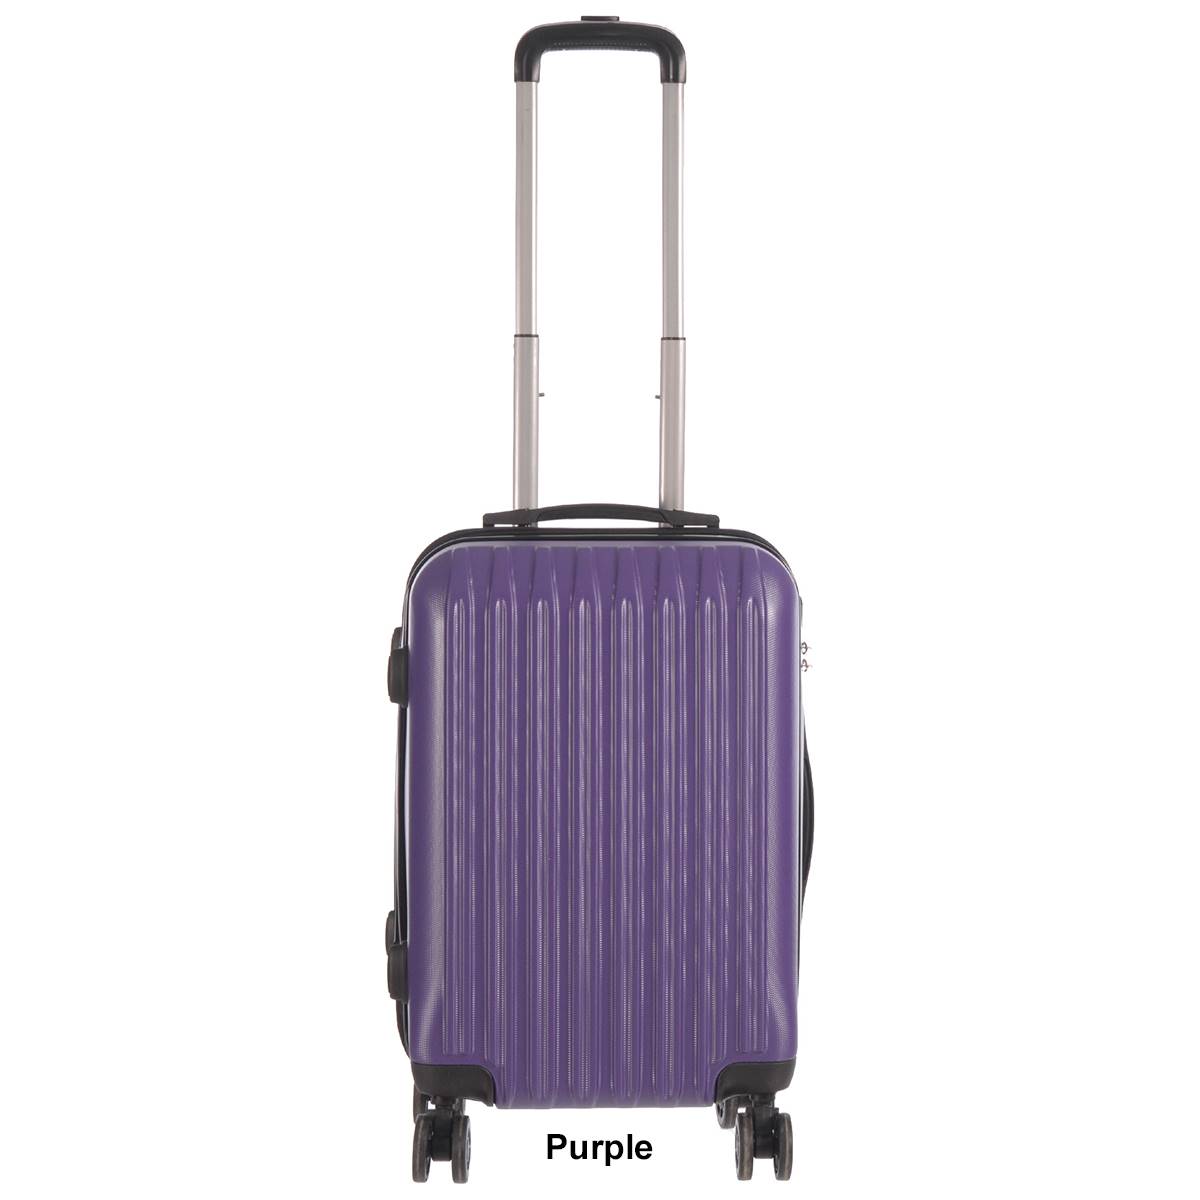 Club Rochelier Grove 20in. Hardside Spinner Carry-On Luggage